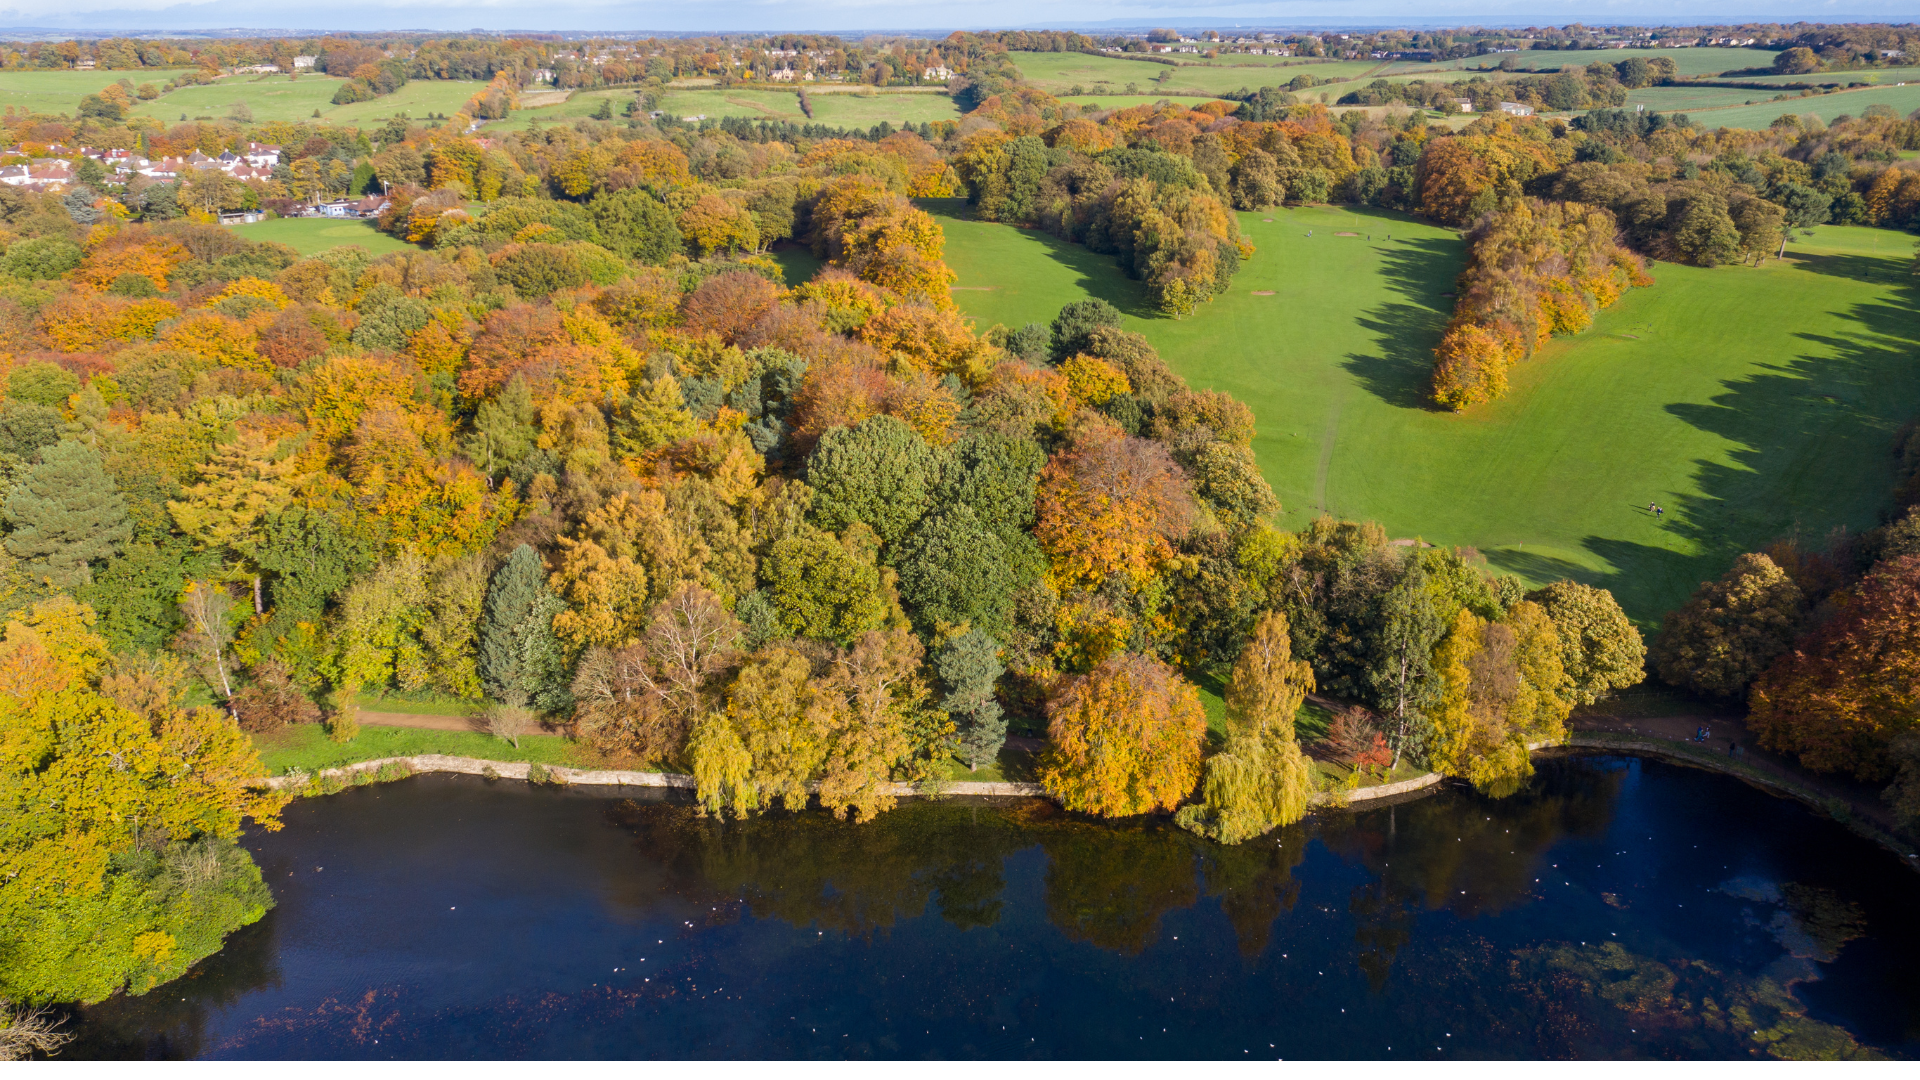 An aerial photo of Roundhay Park in the autumn showing the orange and brown leaves on the trees and the lake